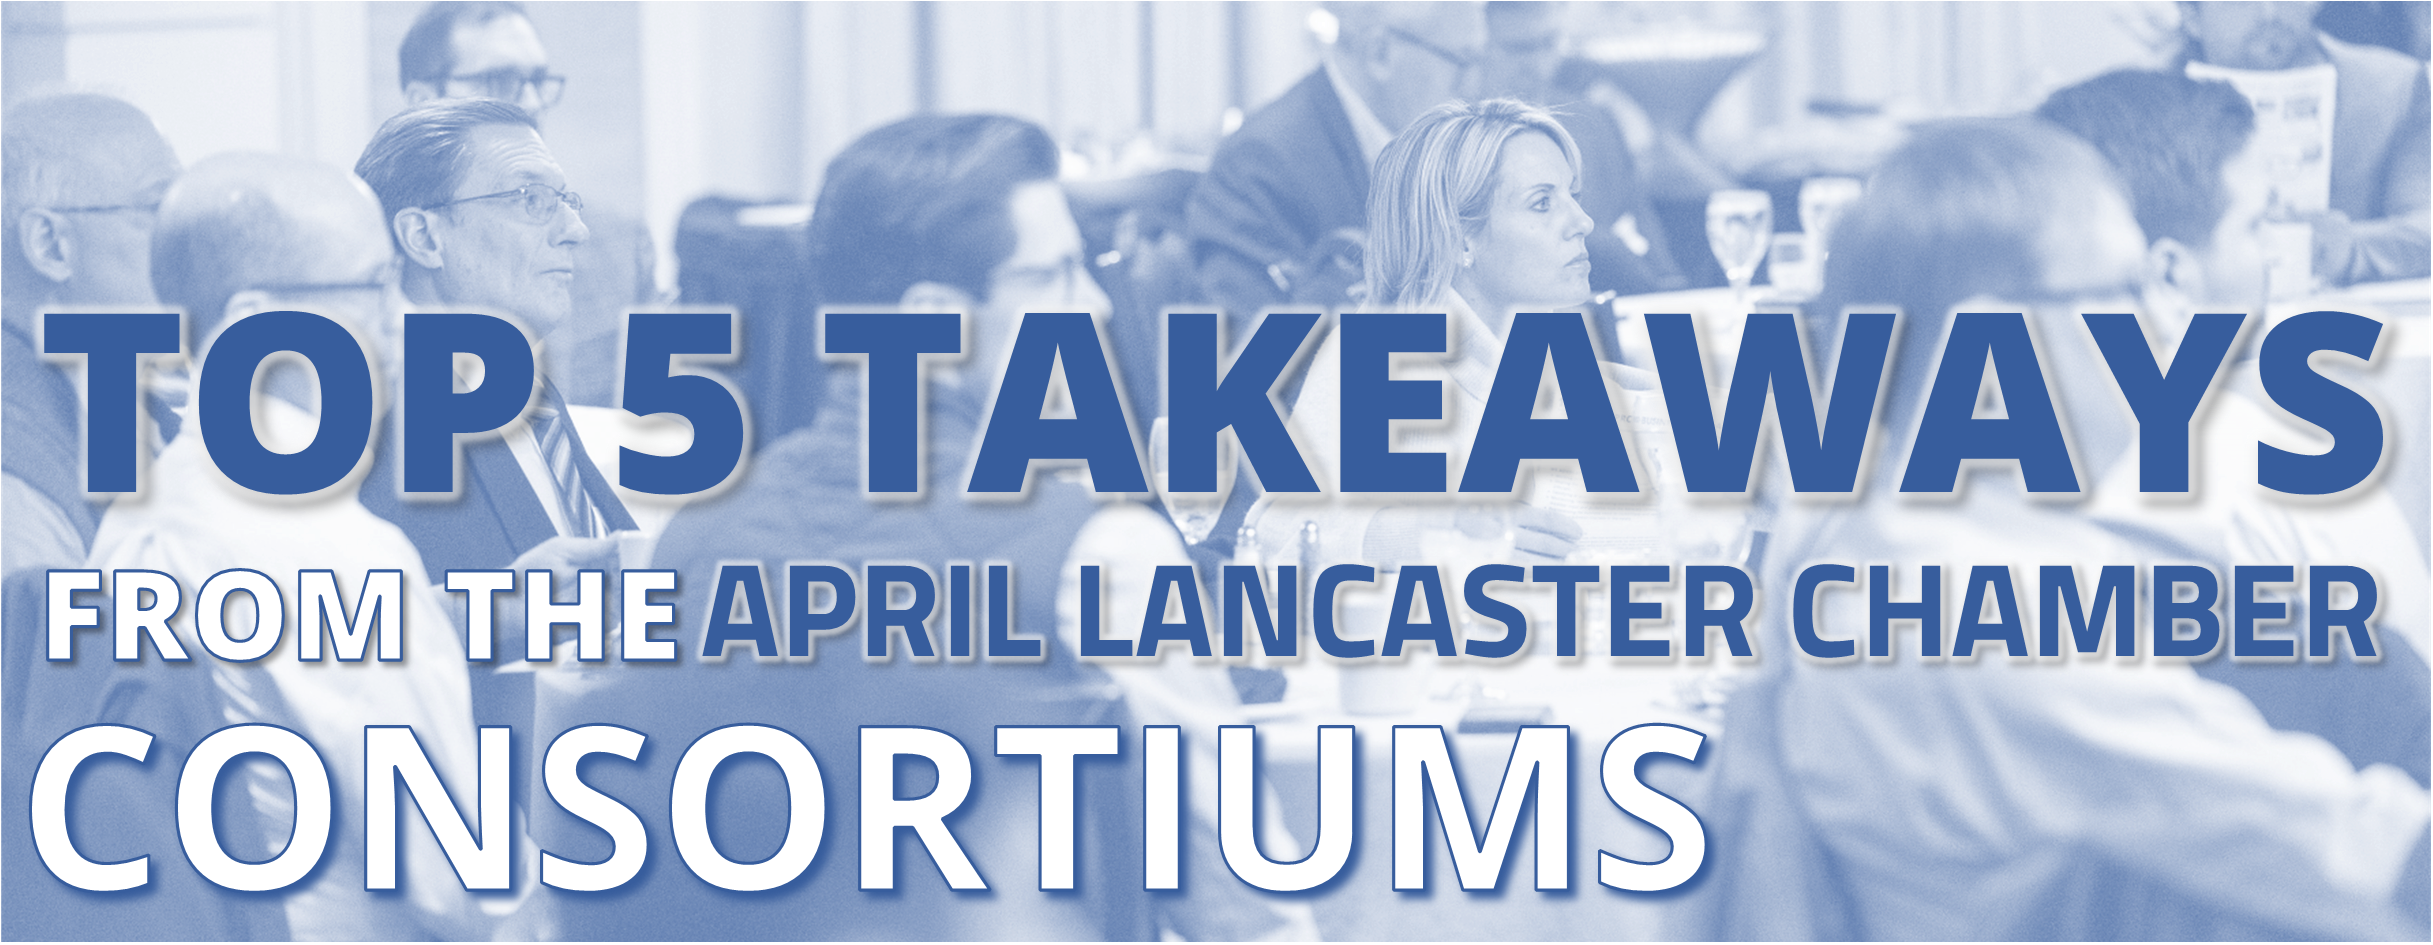 Top 5 Takeaways from the April Lancaster Chamber Consortiums focusing on Business and Education Partnerships